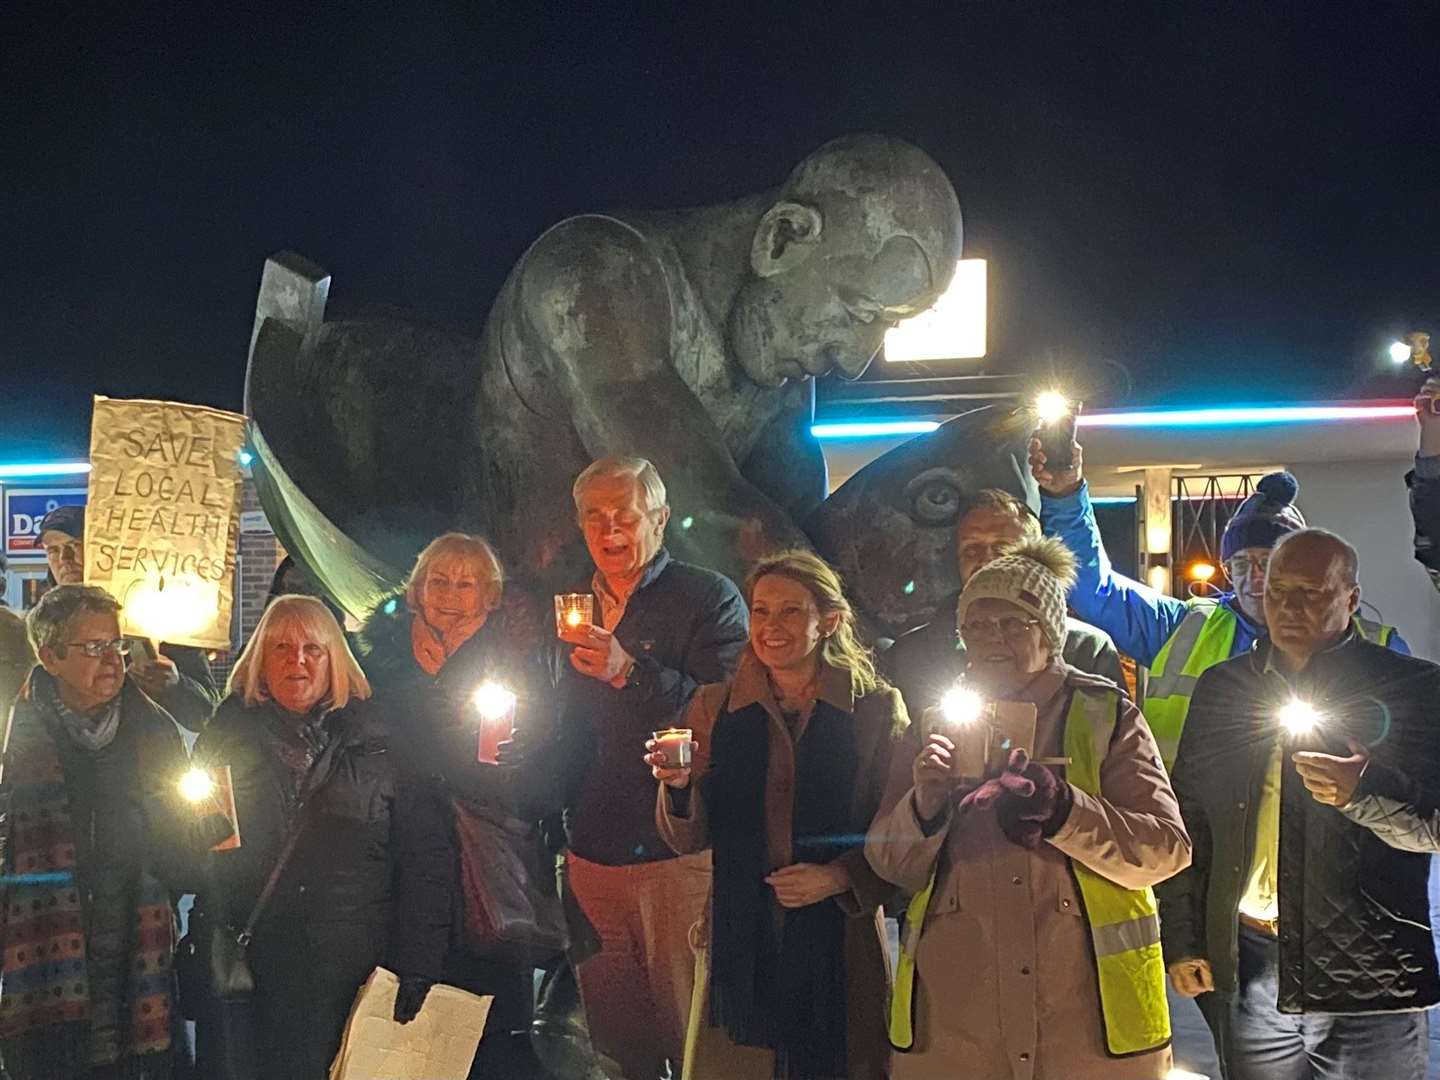 Campaigners gathered at Deal pier lat year for a candlelit vigil over the closure of blood clinics at Deal's hospital. Picture: Natalie Elphicke